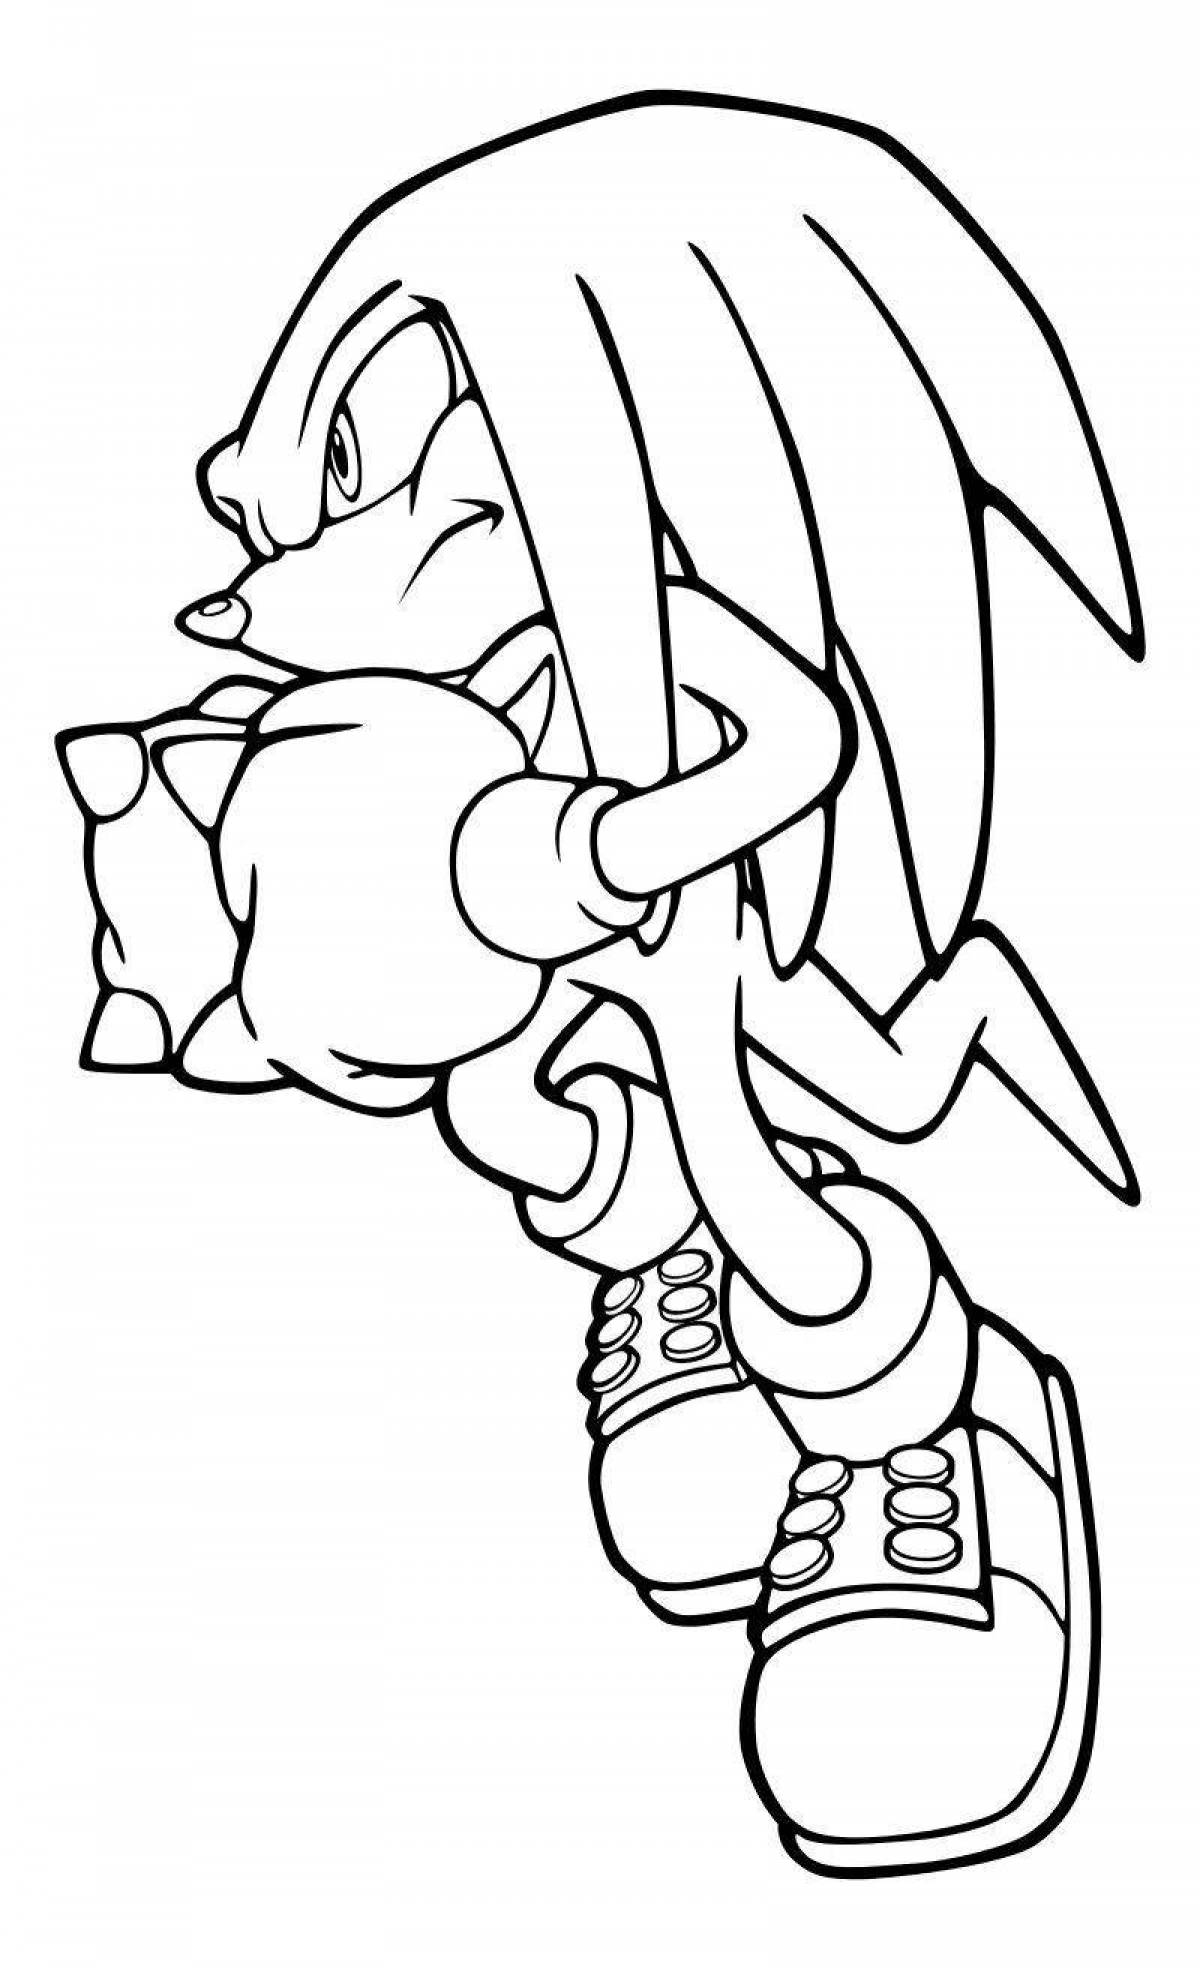 Coloring book brave echidna knuckles